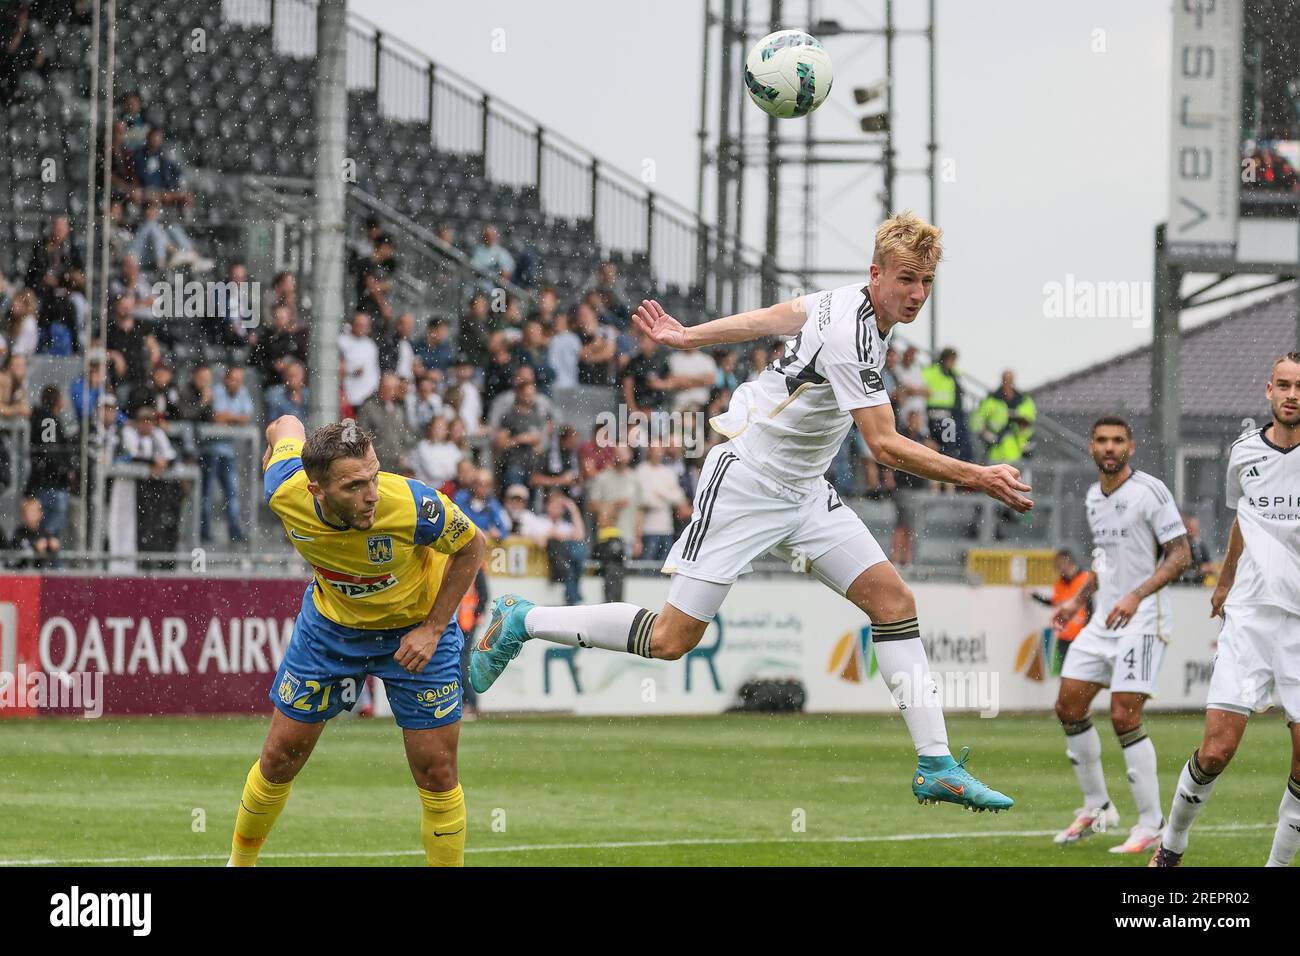 Eupen, Belgium. 29th July, 2023. Westerlo's Erdon Daci and Eupen's Rune  Paeshuyse fight for the ball during a soccer match between KAS Eupen and  KVC Westerlo, Saturday 29 July 2023 in Eupen,